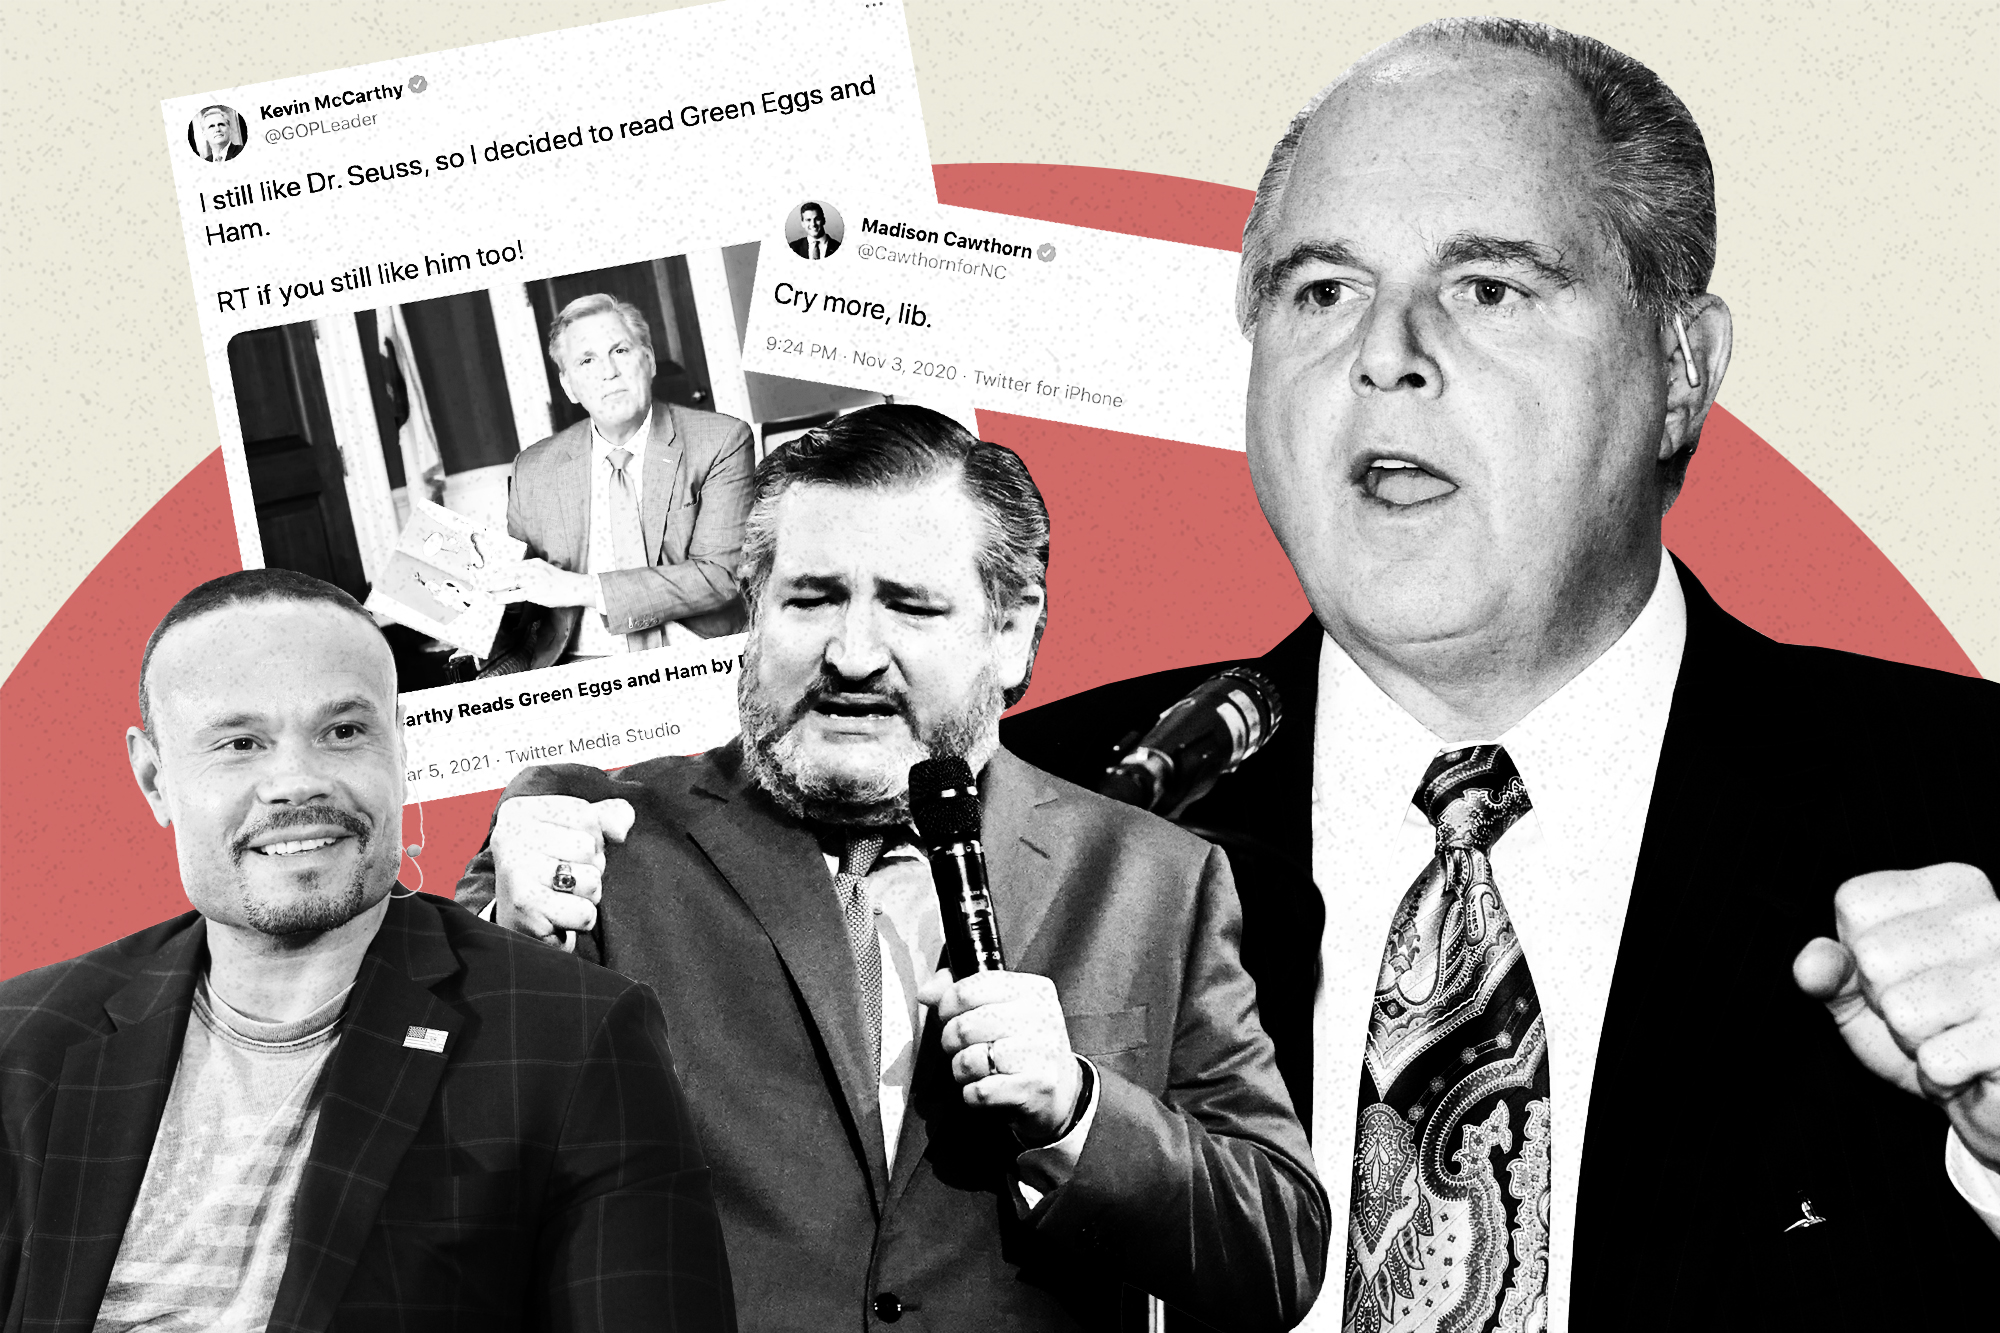 How ‘Proudly owning the Libs’ Turned the GOP’s Core Perception